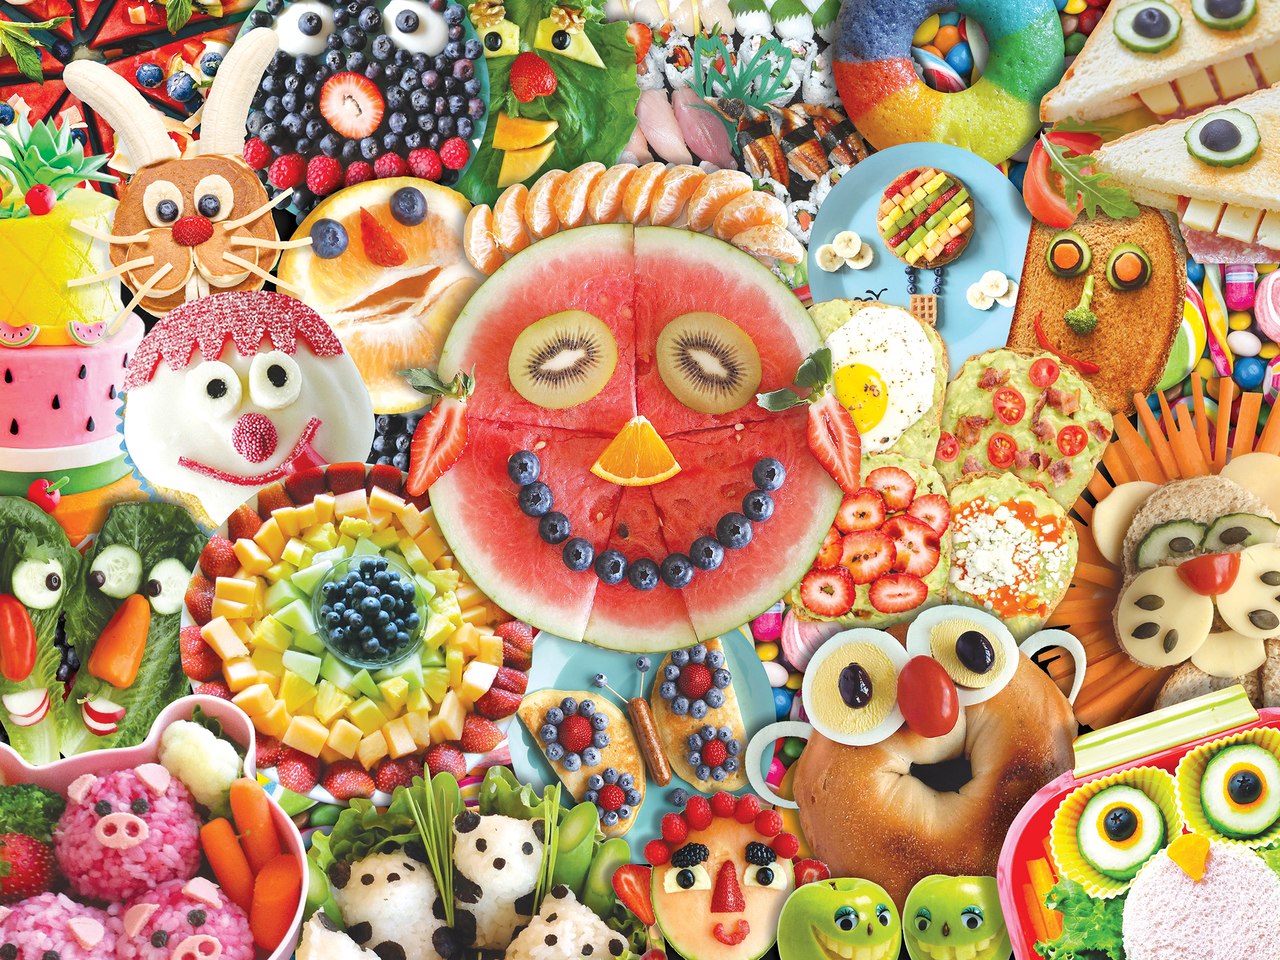 Funny Face Food - 300pc EzGrip Jigsaw Puzzle by Masterpieces  			  					NEW